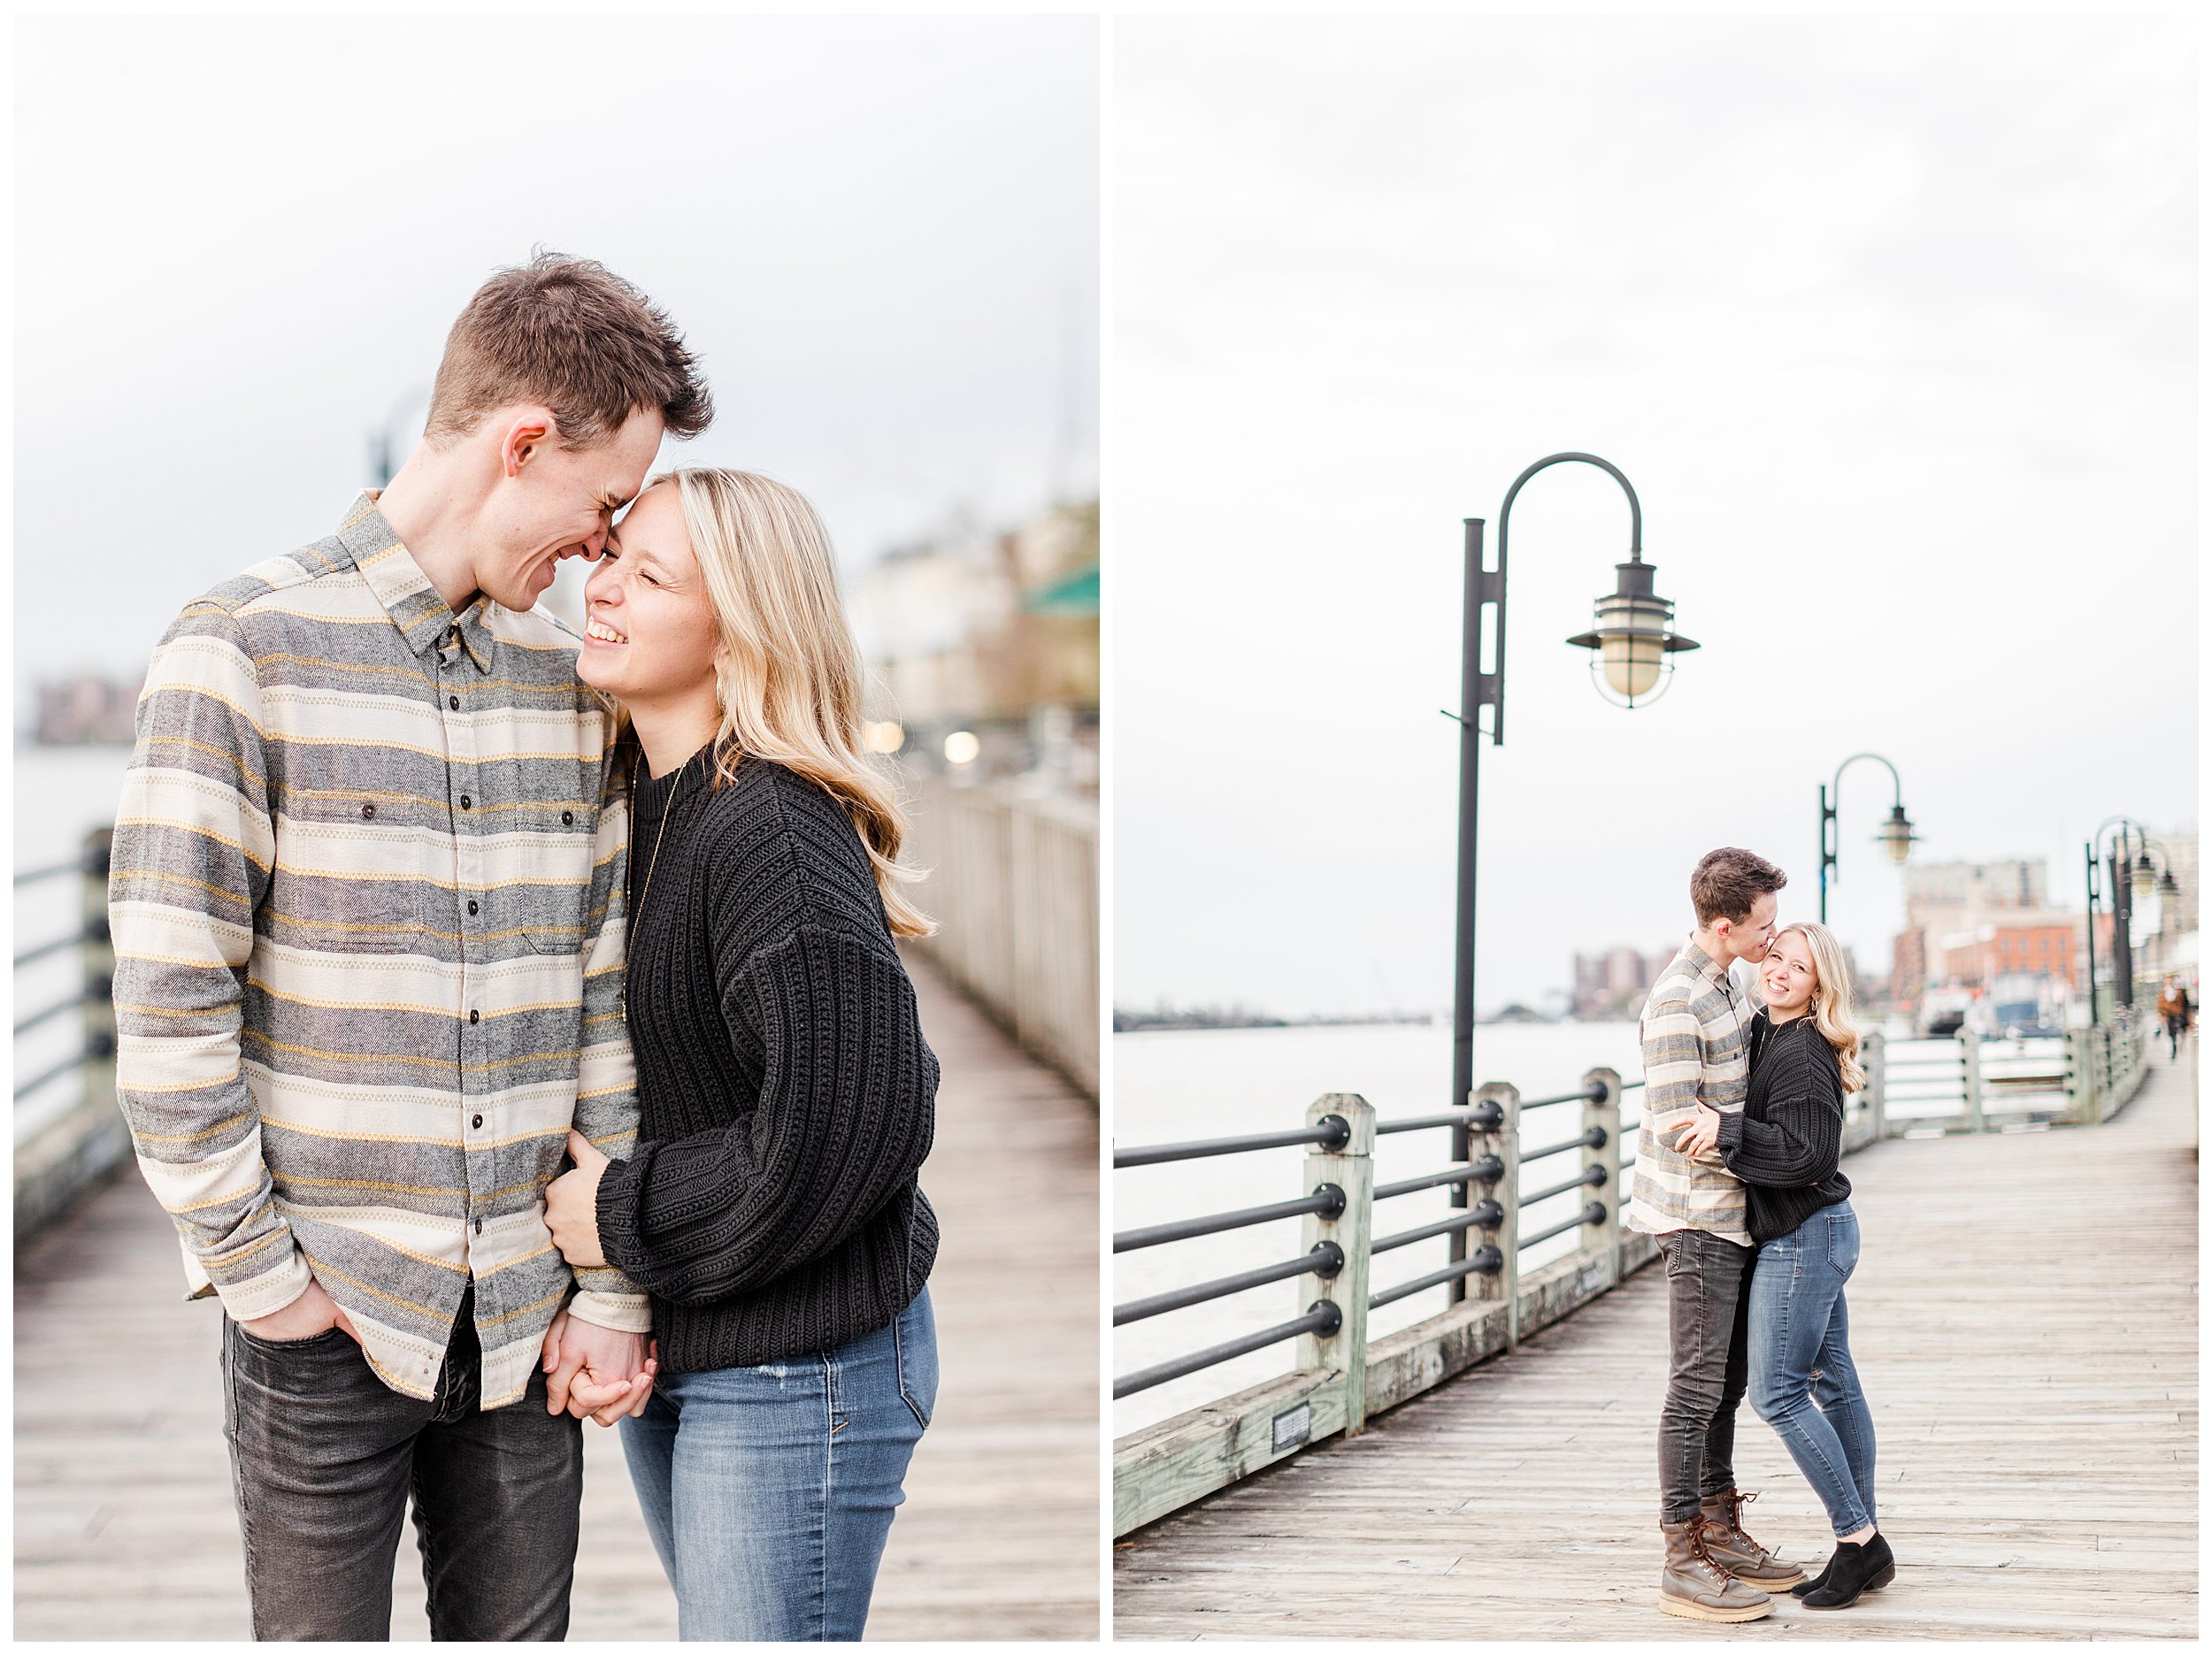 wilmington riverwalk and historic district engagement session ashley christ photography wilmington wedding photographer_0073.jpg